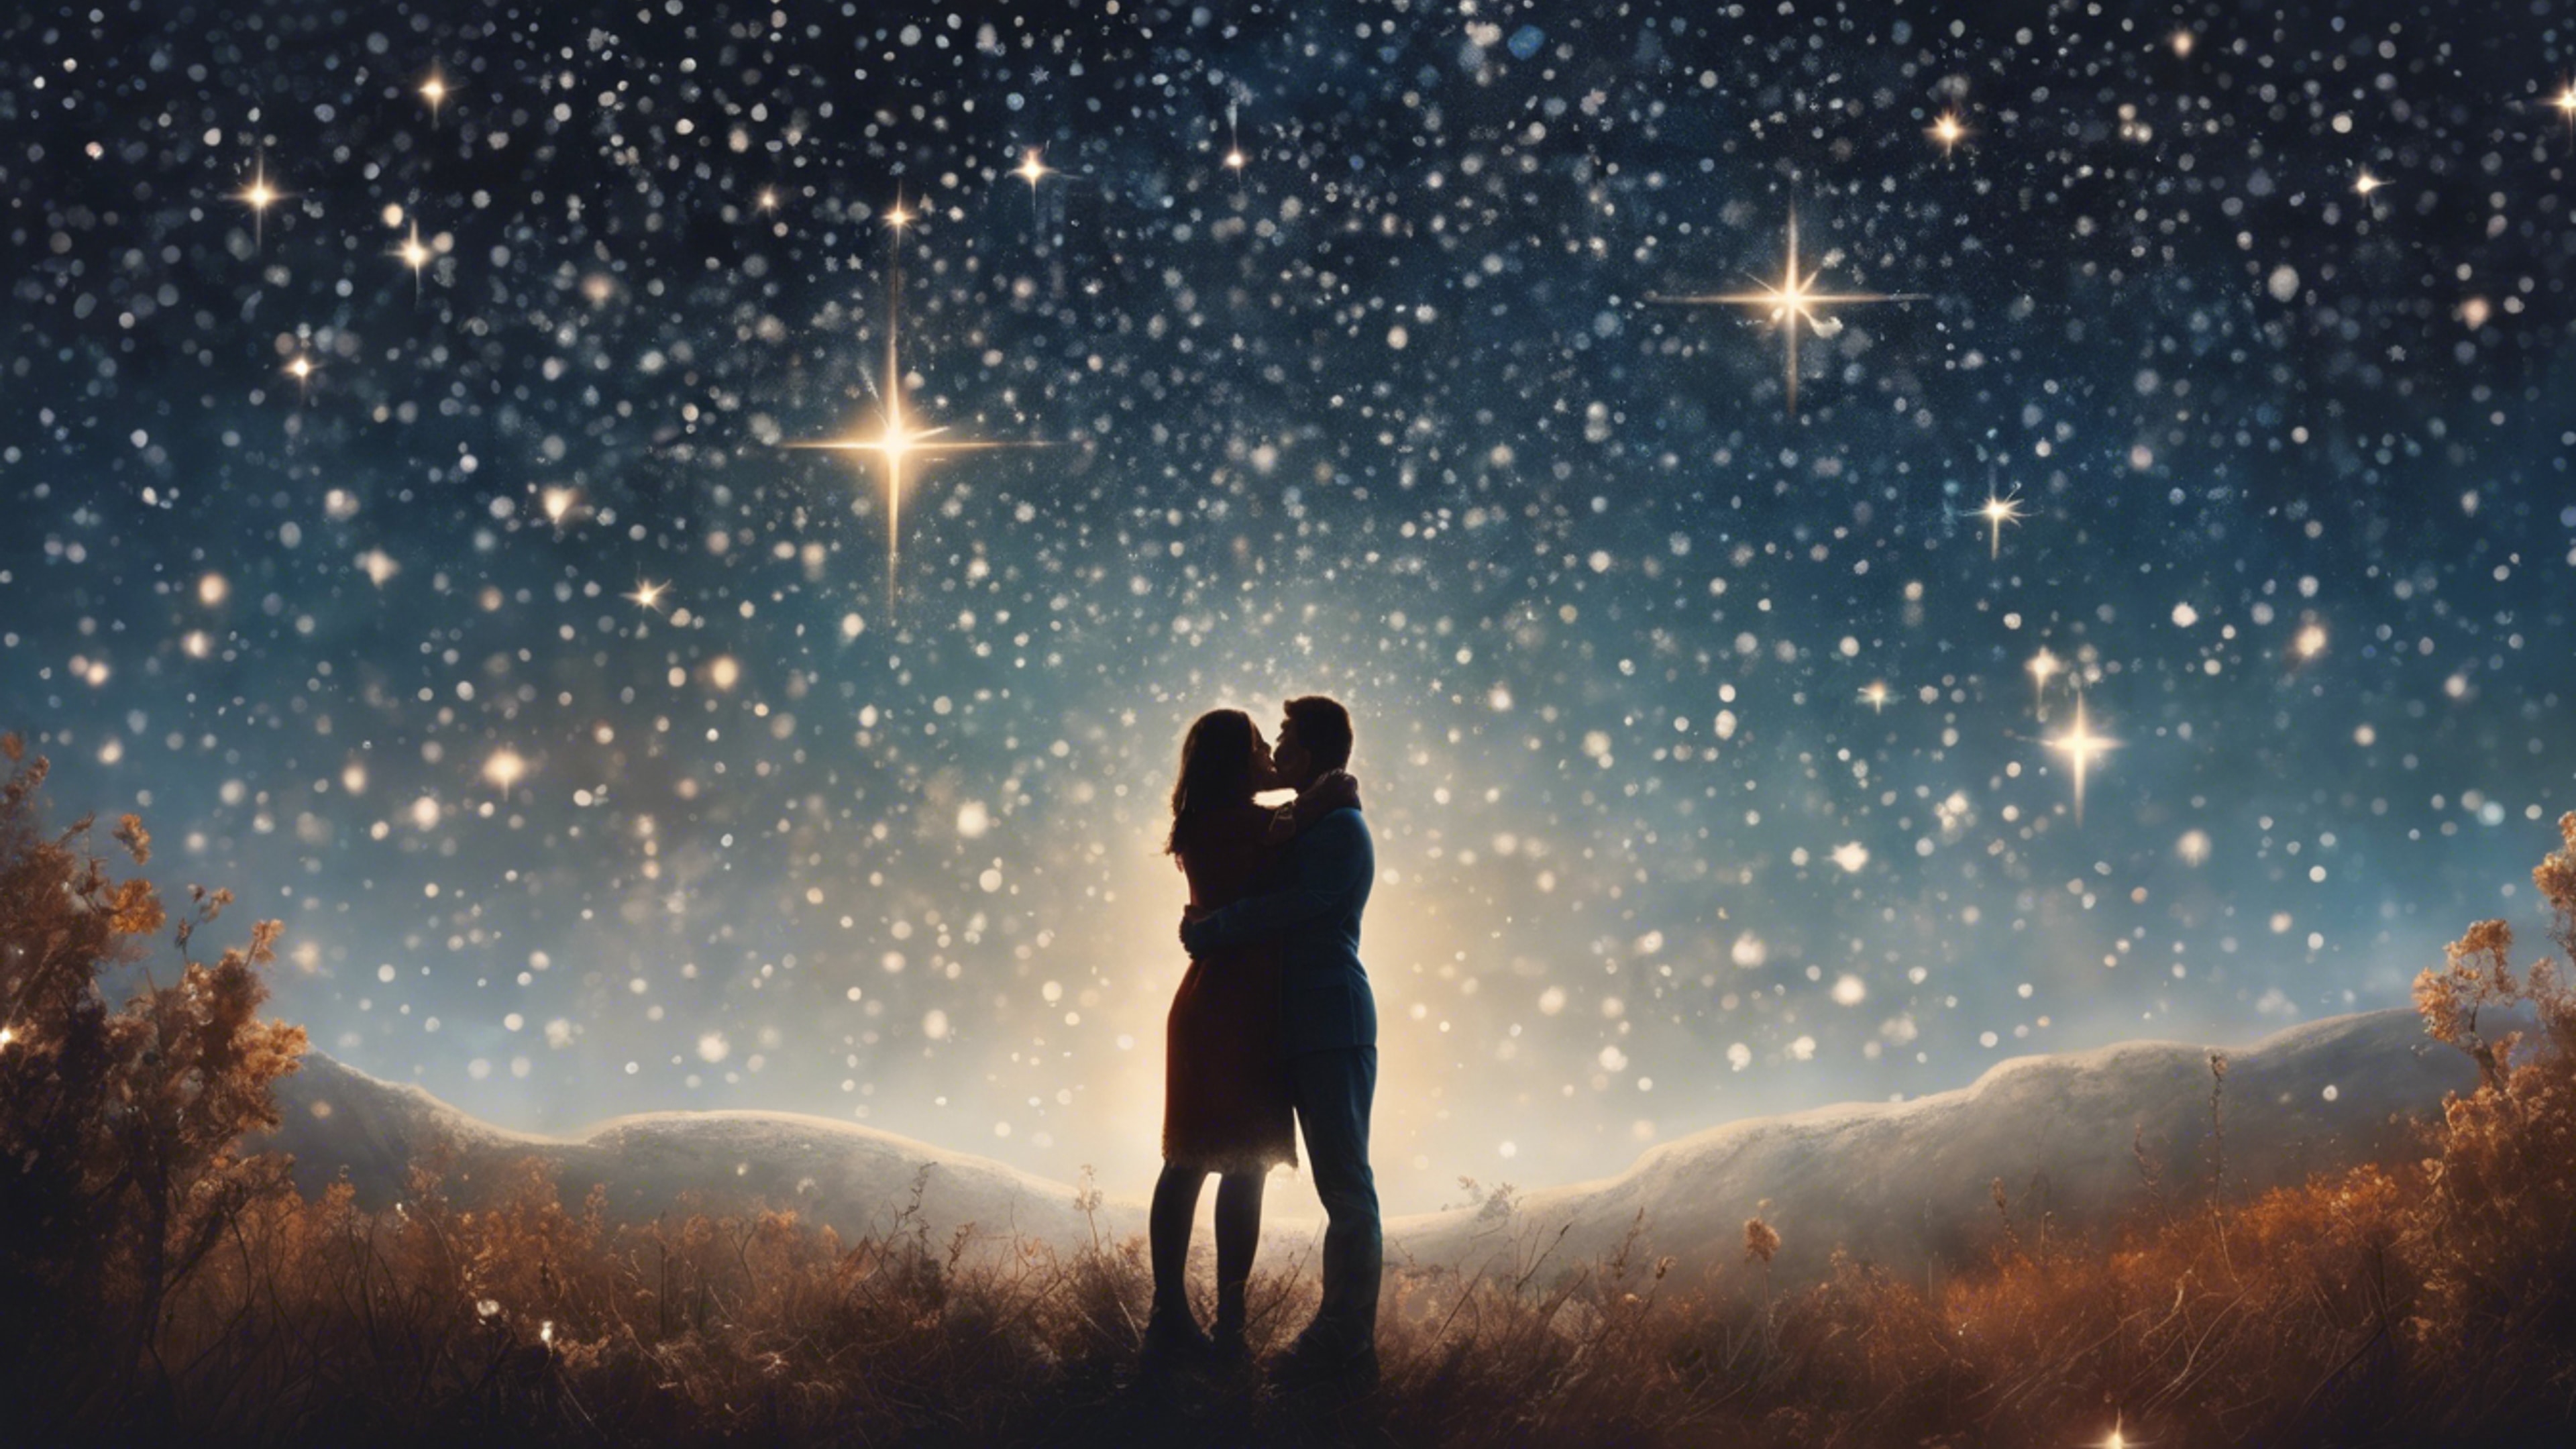 A timeless painting of a couple sharing a romantic moment under a star-filled sky. Wallpaper[26fb6f637c3e4c759c8d]